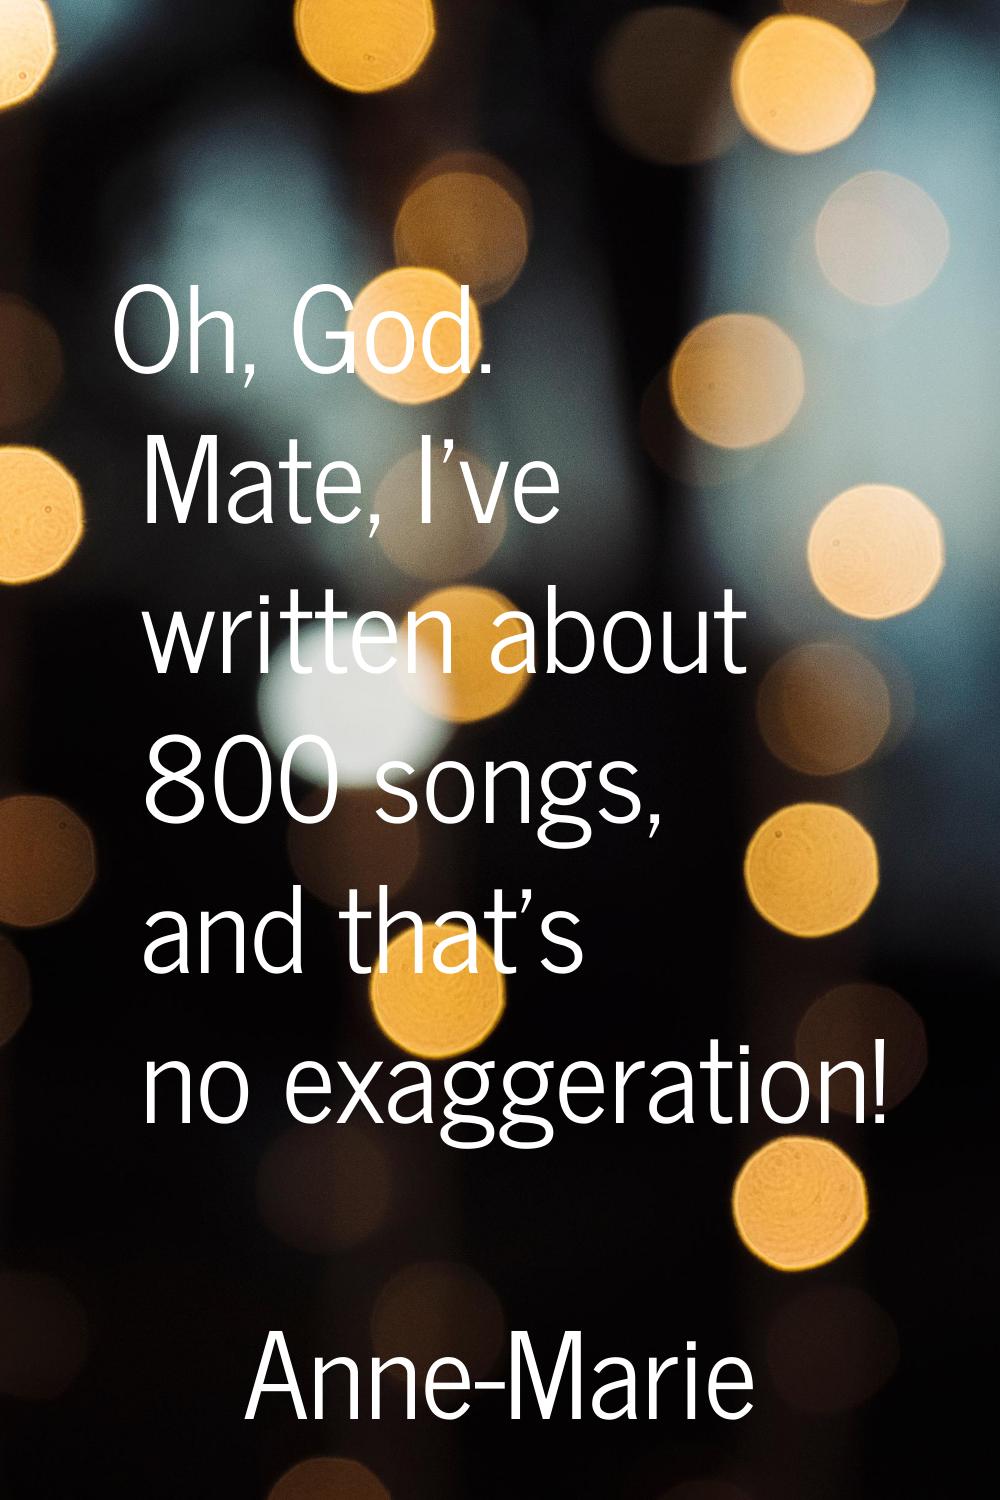 Oh, God. Mate, I've written about 800 songs, and that's no exaggeration!